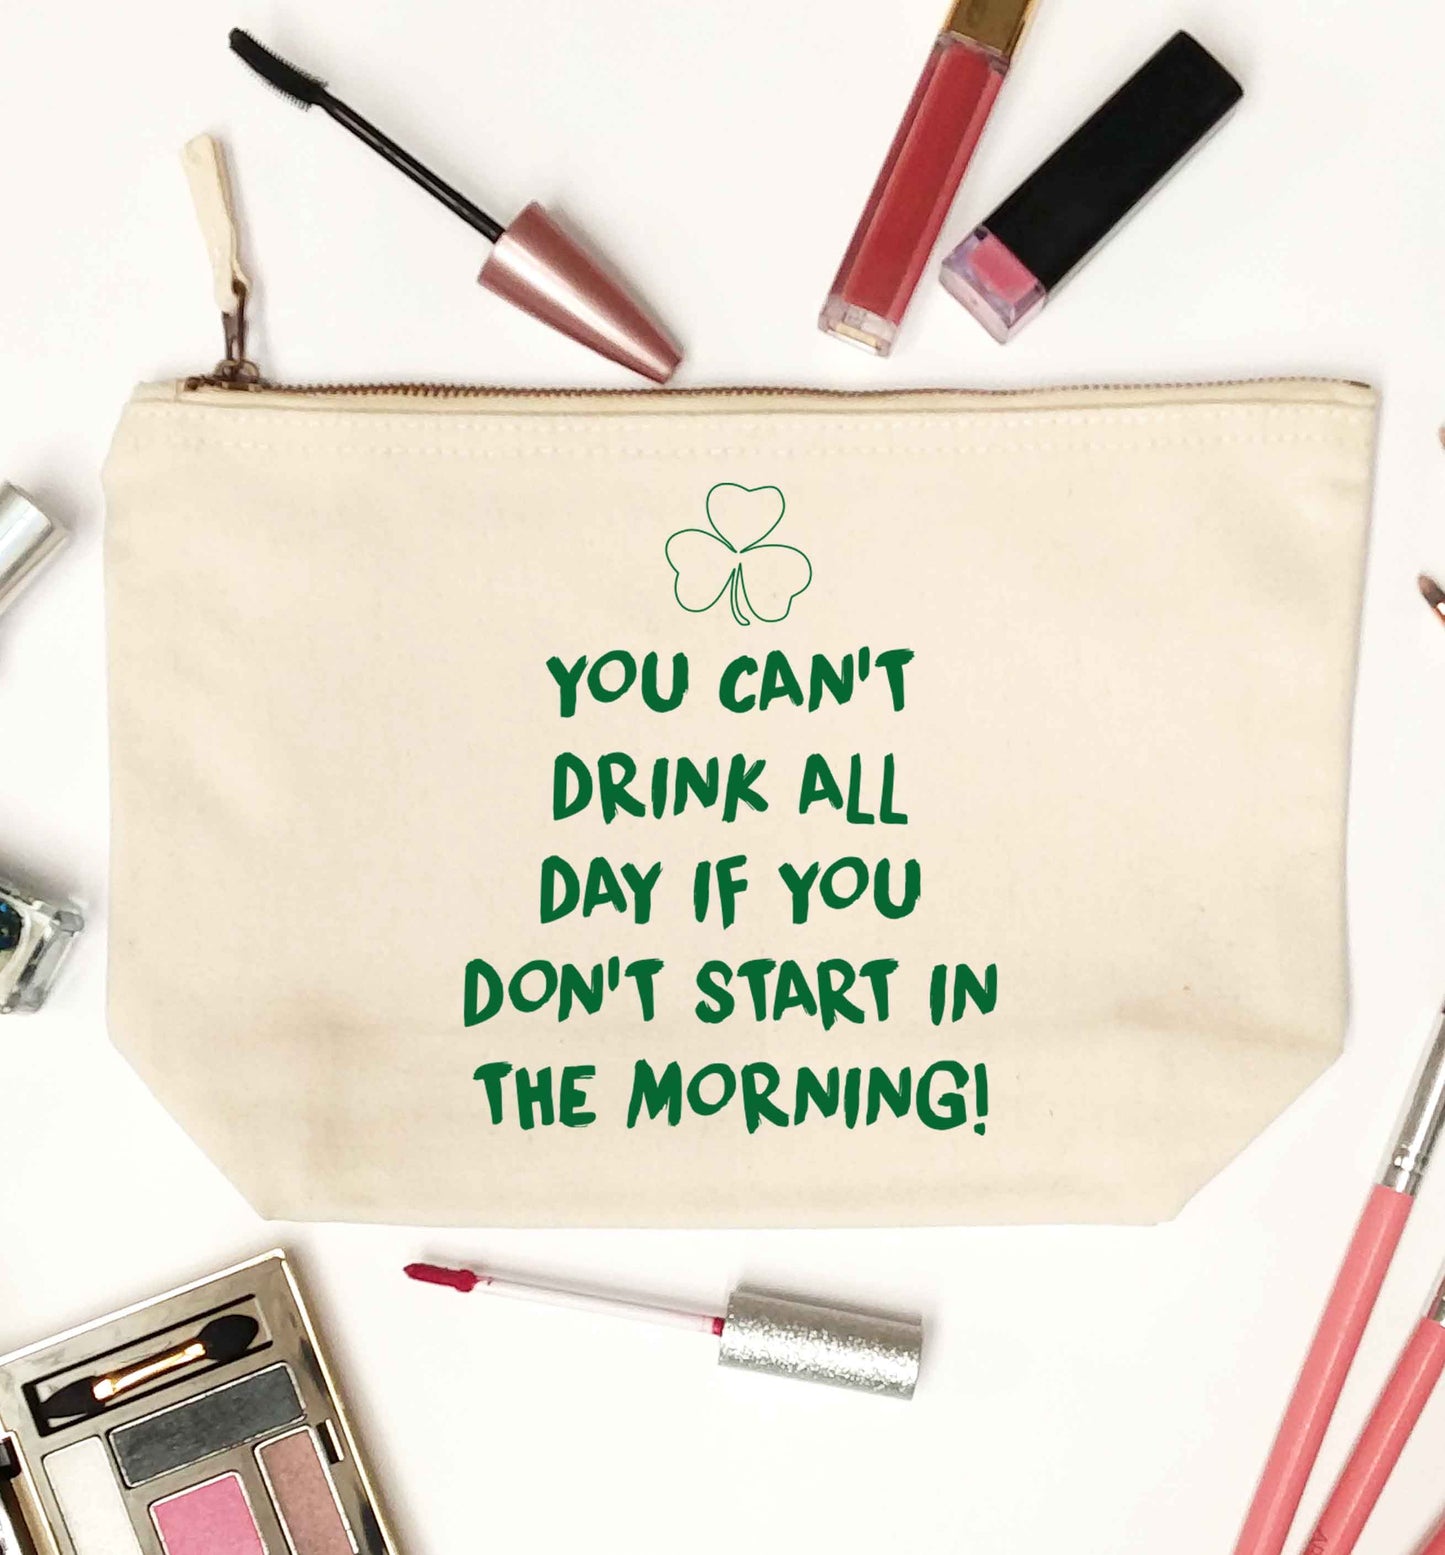 You can't drink all day if you don't start in the morning natural makeup bag